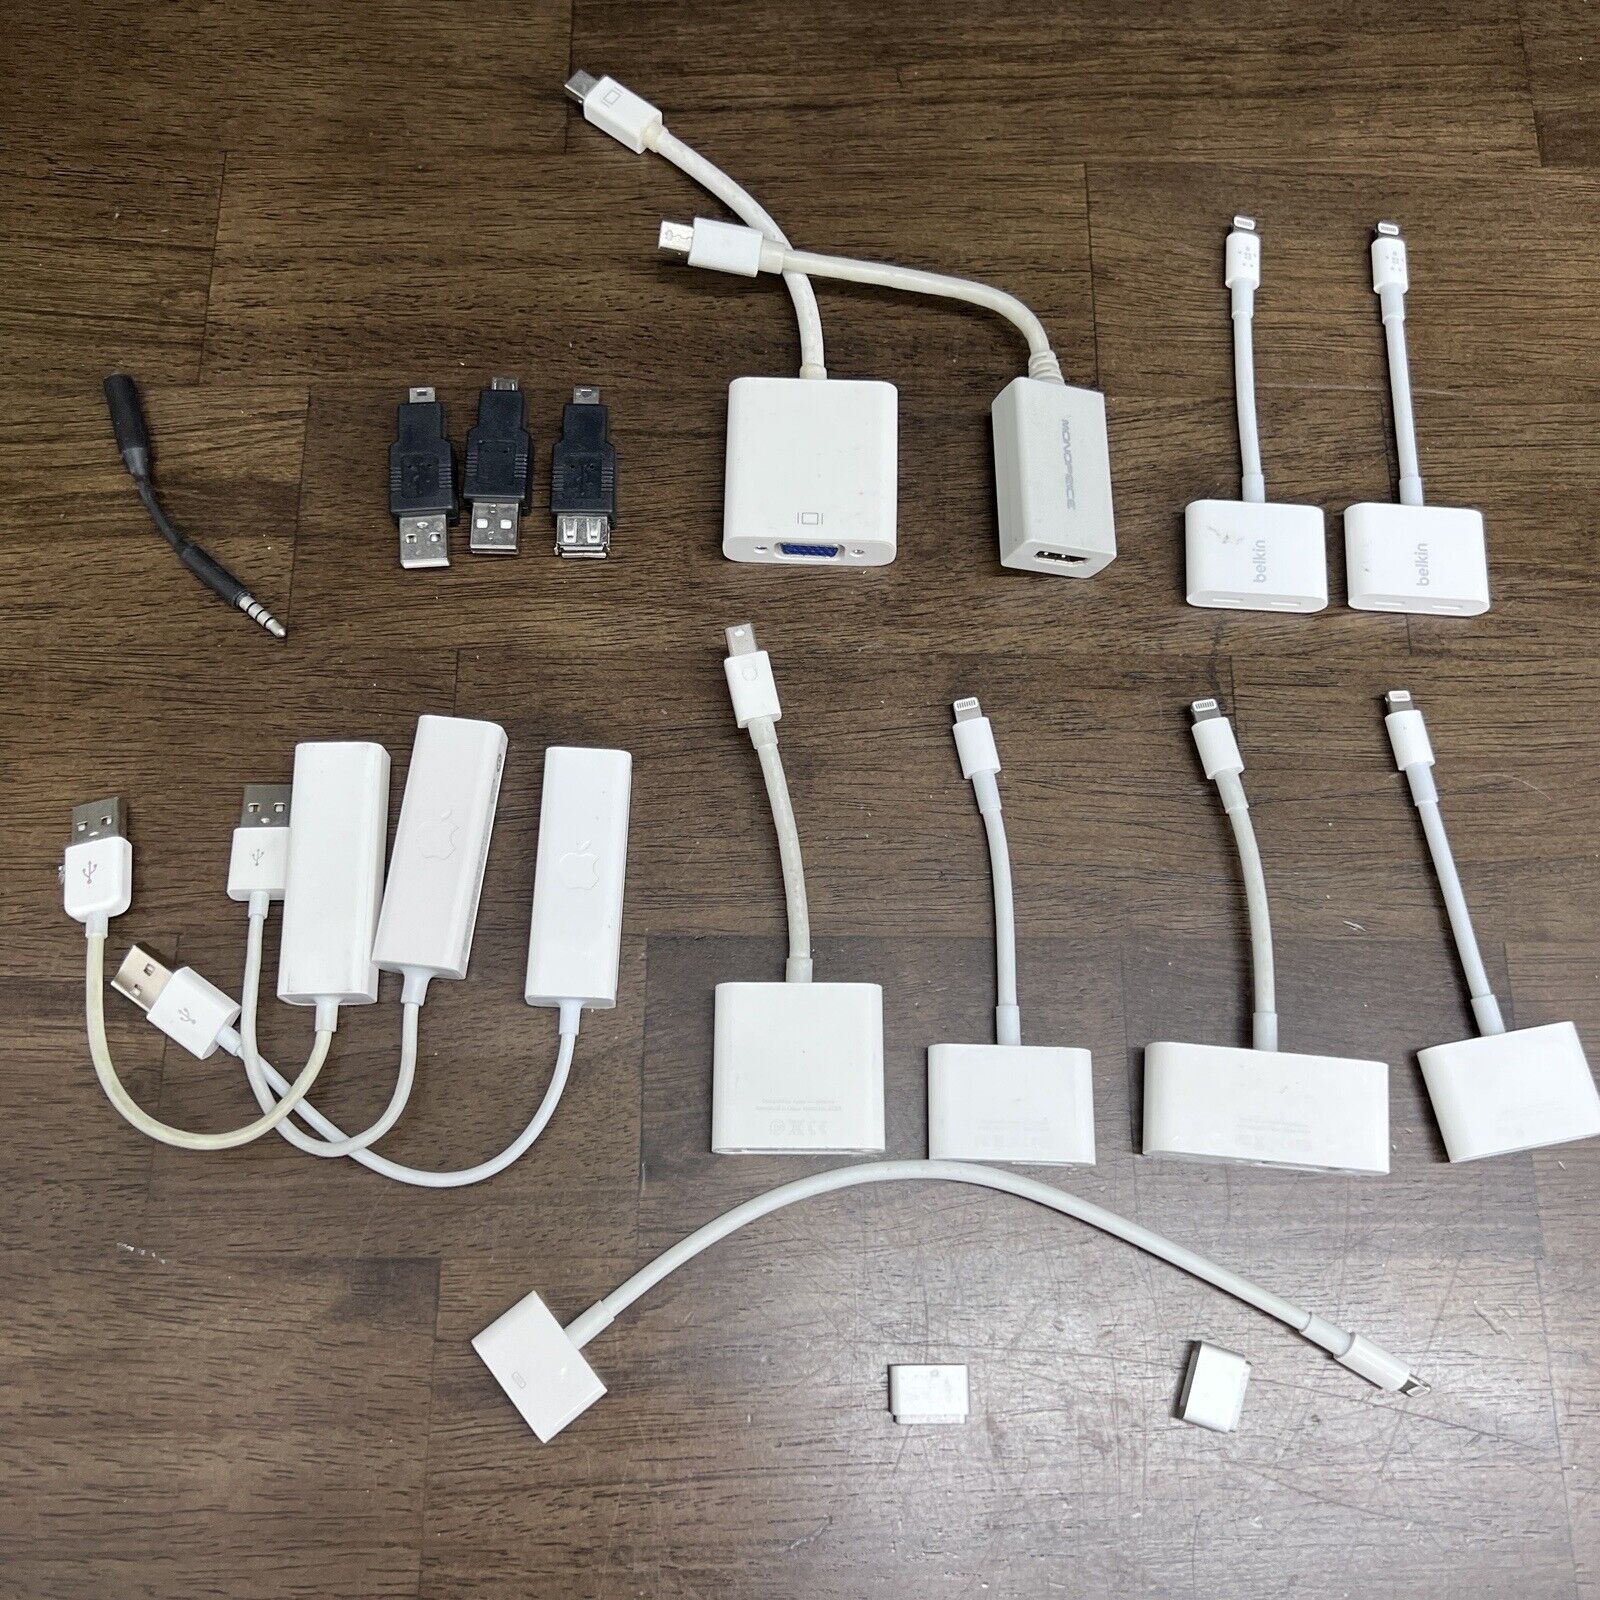 Lot of 18 PCs OEM and non-OEM apple chargers cords connectors